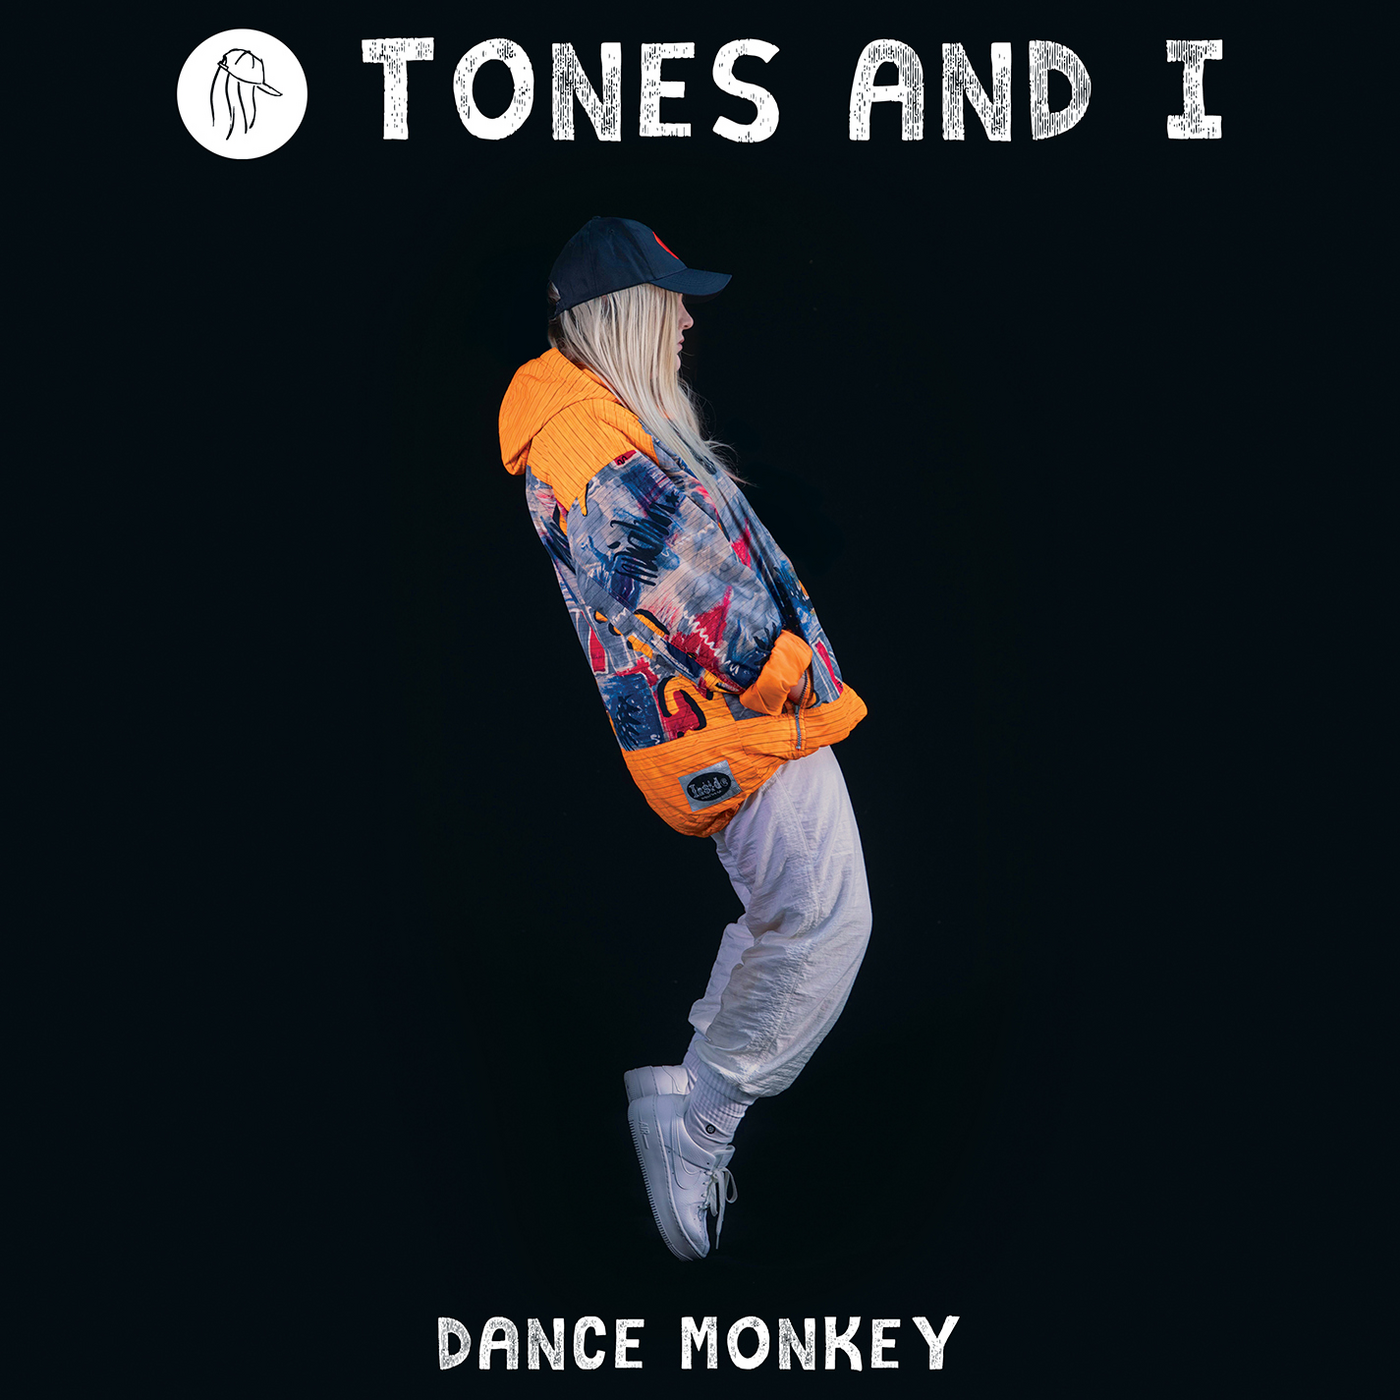 Art for Dance Monkey by Tones And I